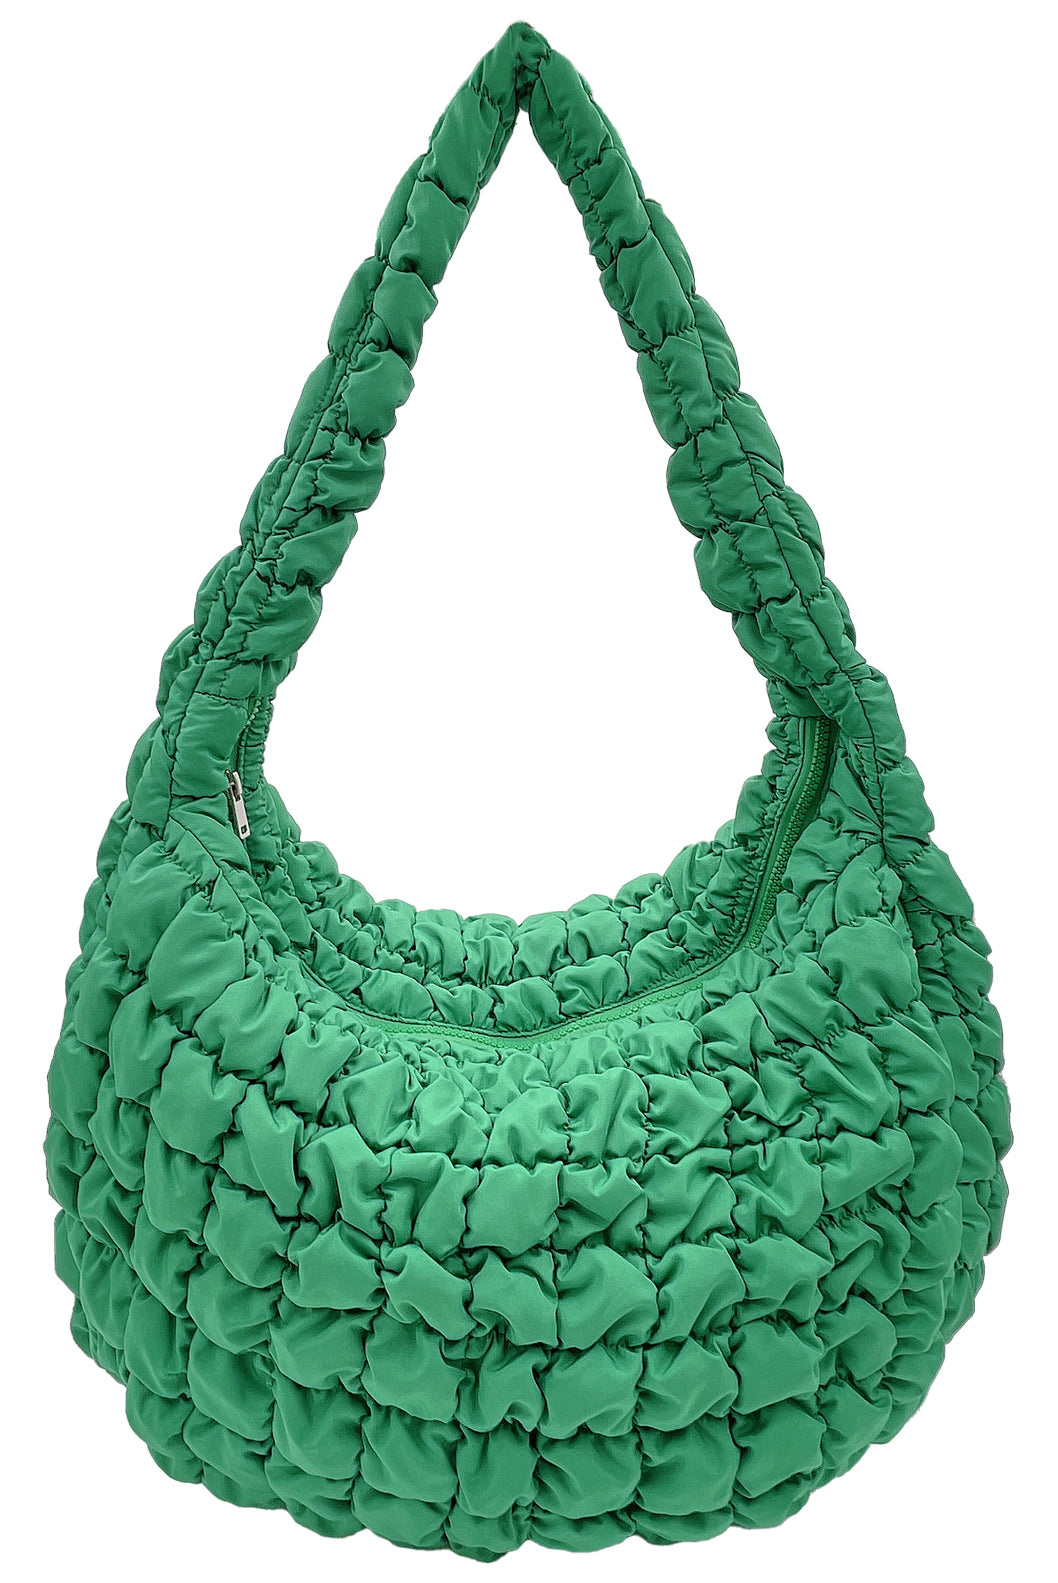 Large Quilted Bag